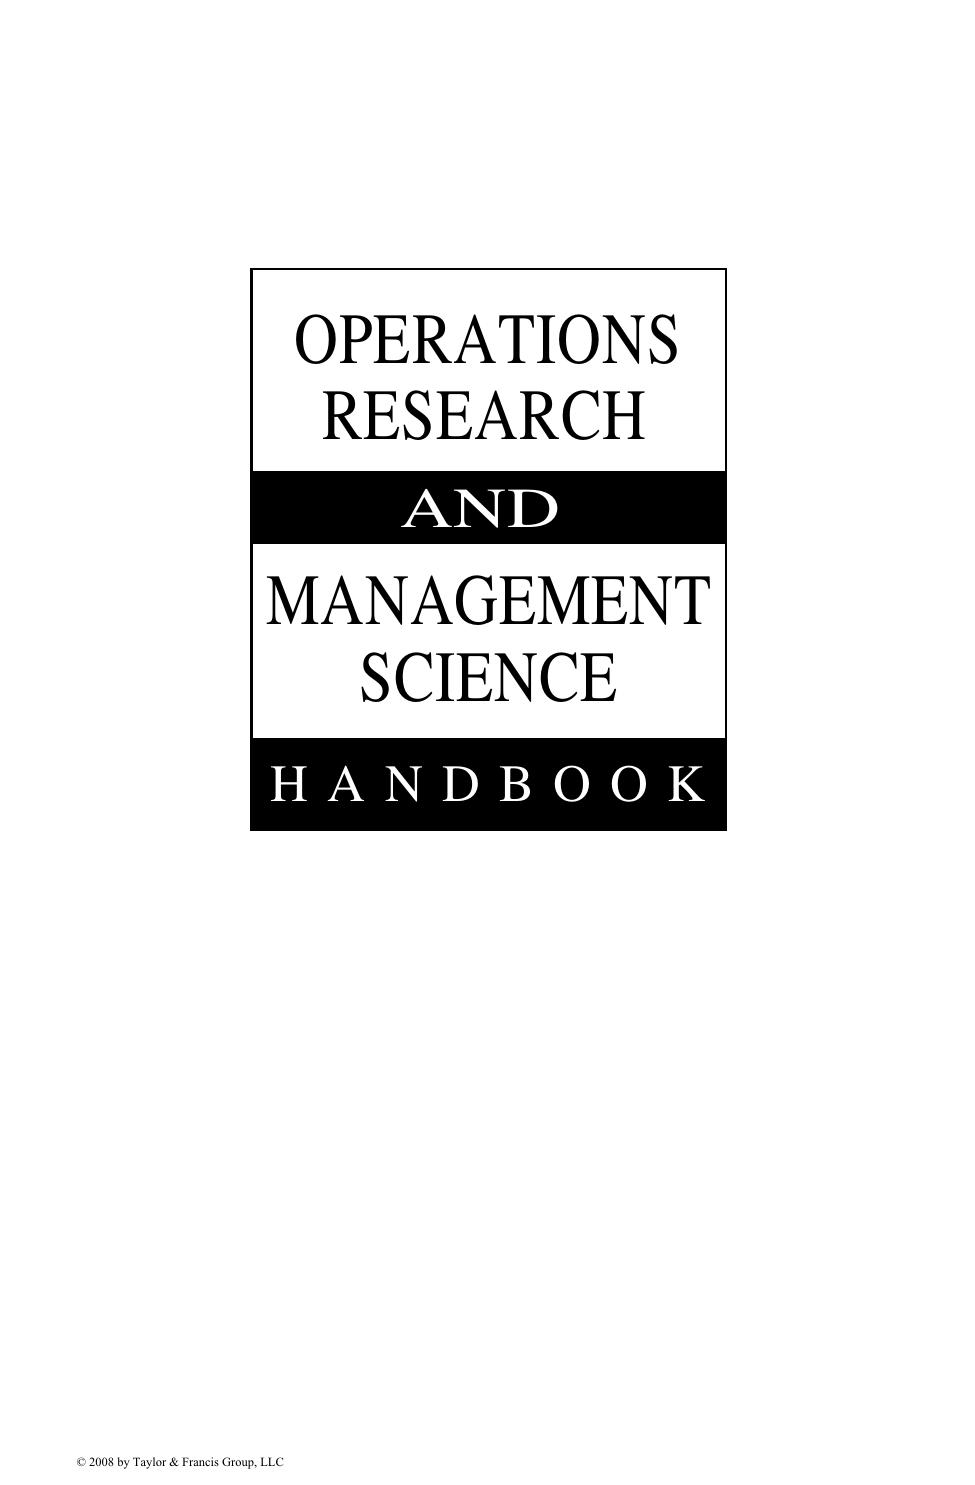 OPERATIONS RESEARCH AND MANAGEMENT SCIENCE HANDBOOK